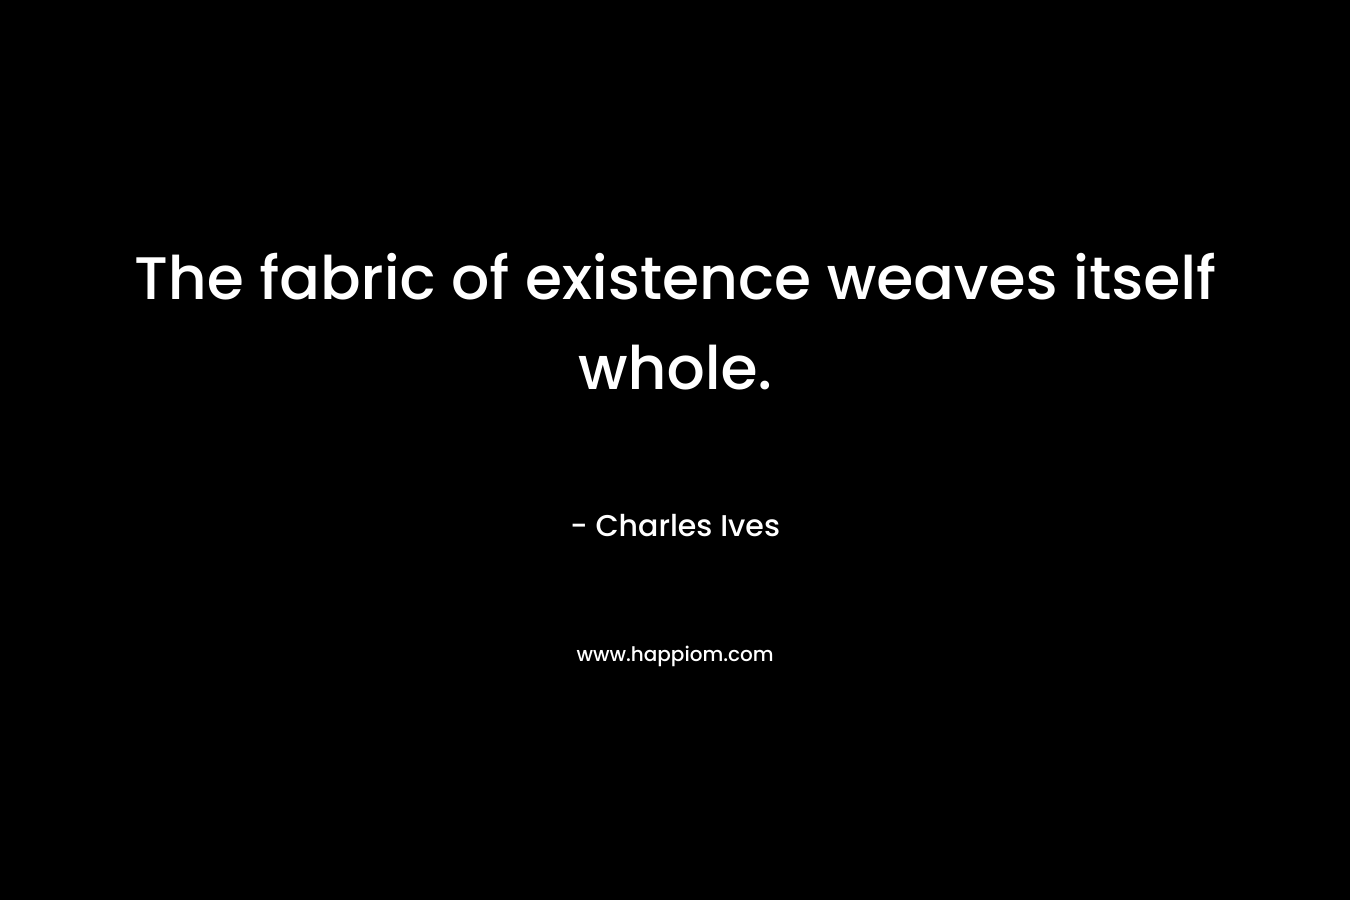 The fabric of existence weaves itself whole. – Charles Ives